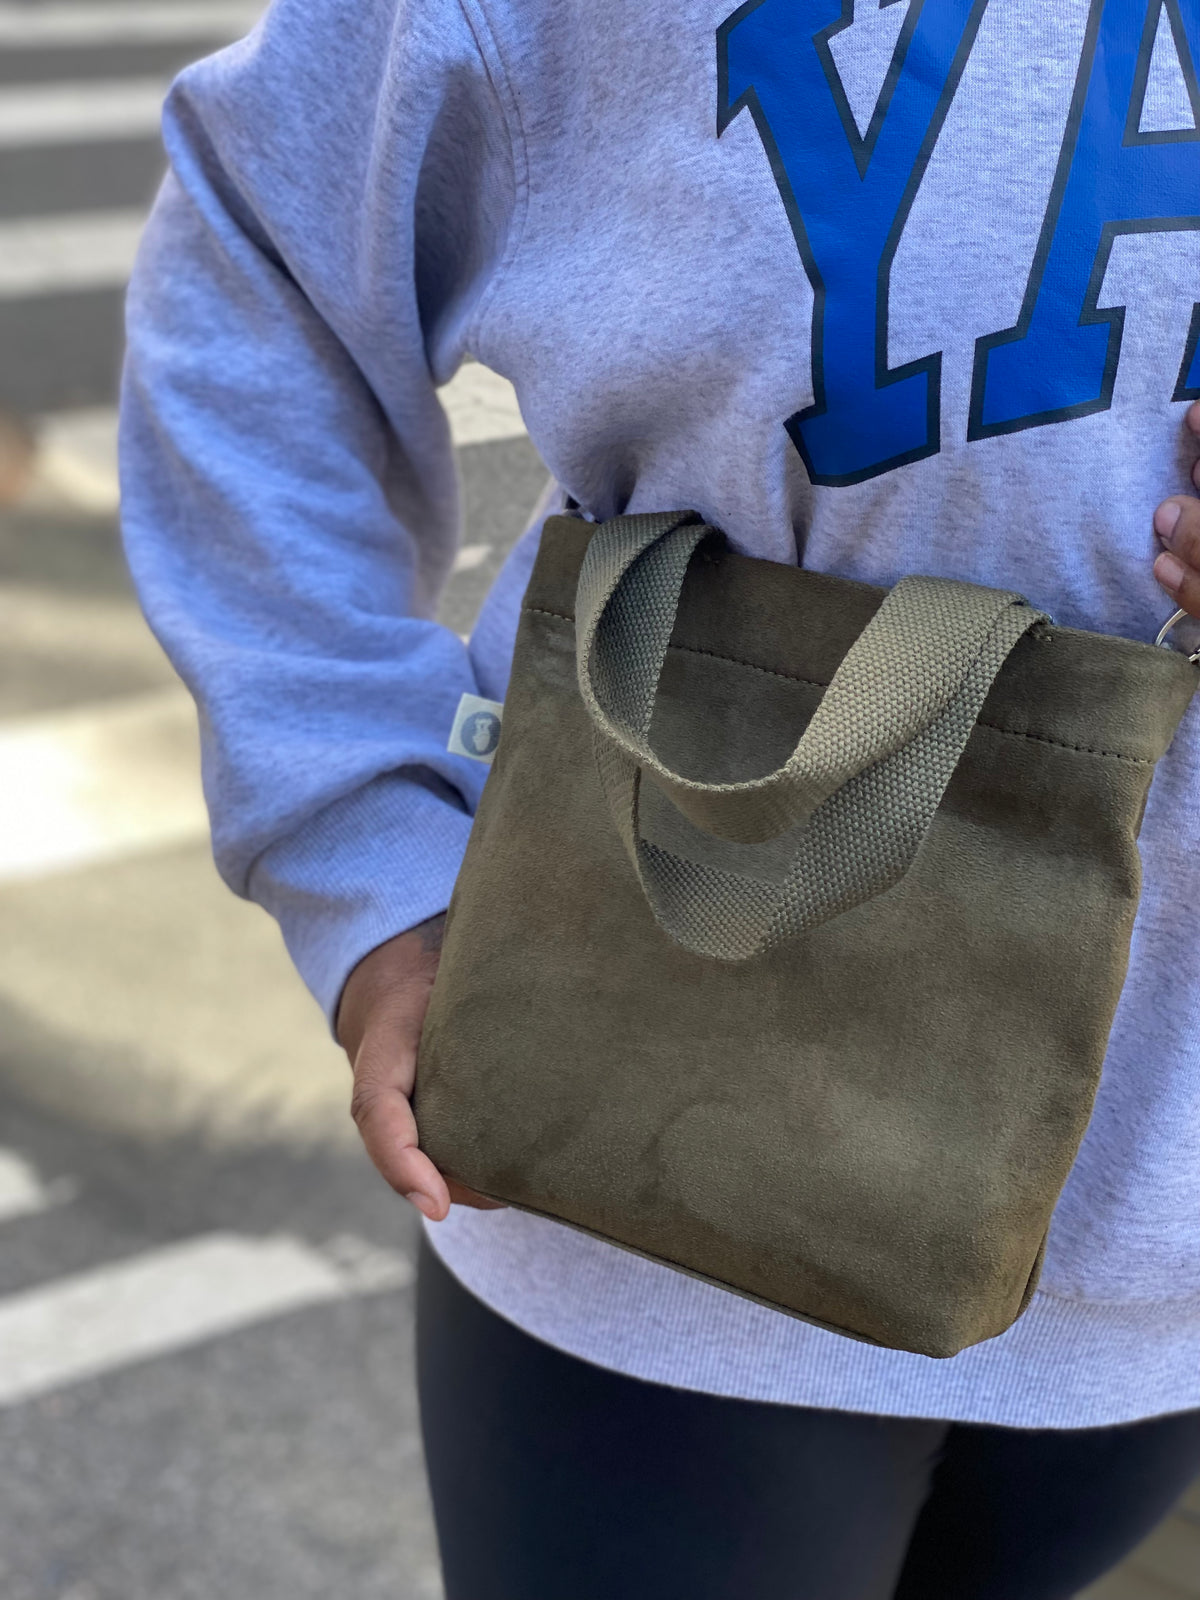 Everything Bag Olive with White Matte BEACHY